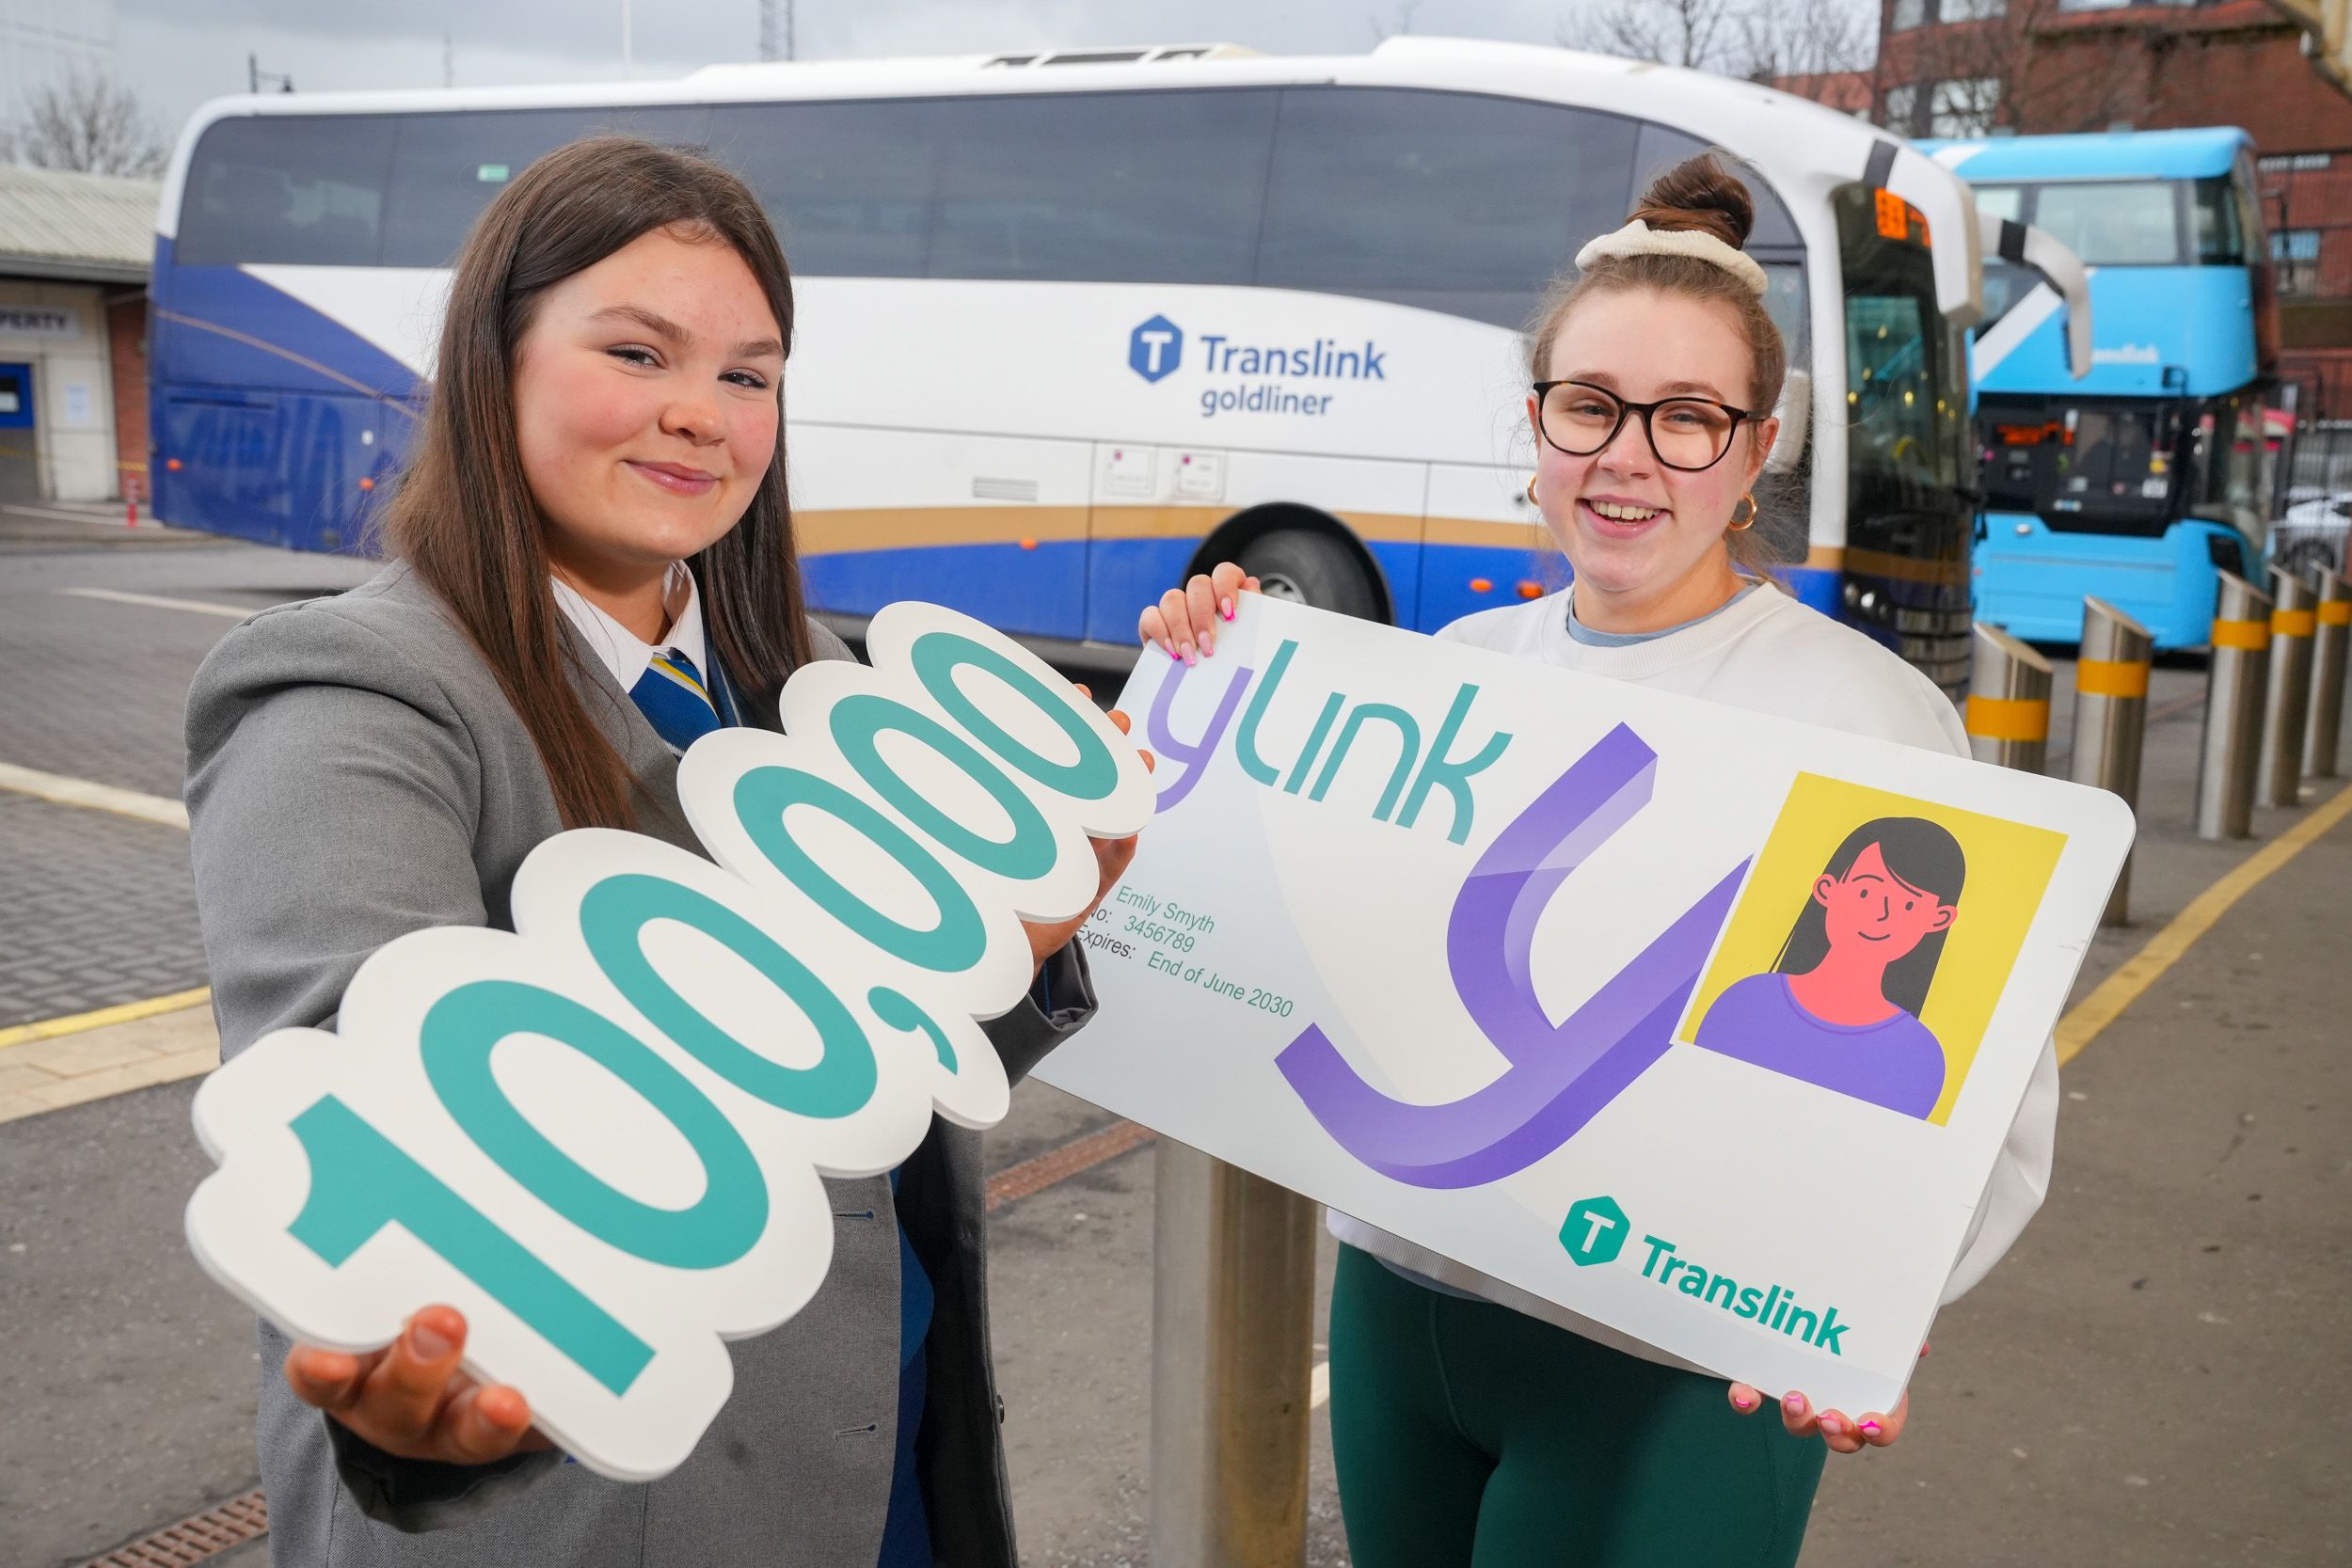 SIGNED UP: Claire and Ciara Hesketh, from Translink\'s Youth Forum, announce the milestone of 100,000 yLink card sign ups